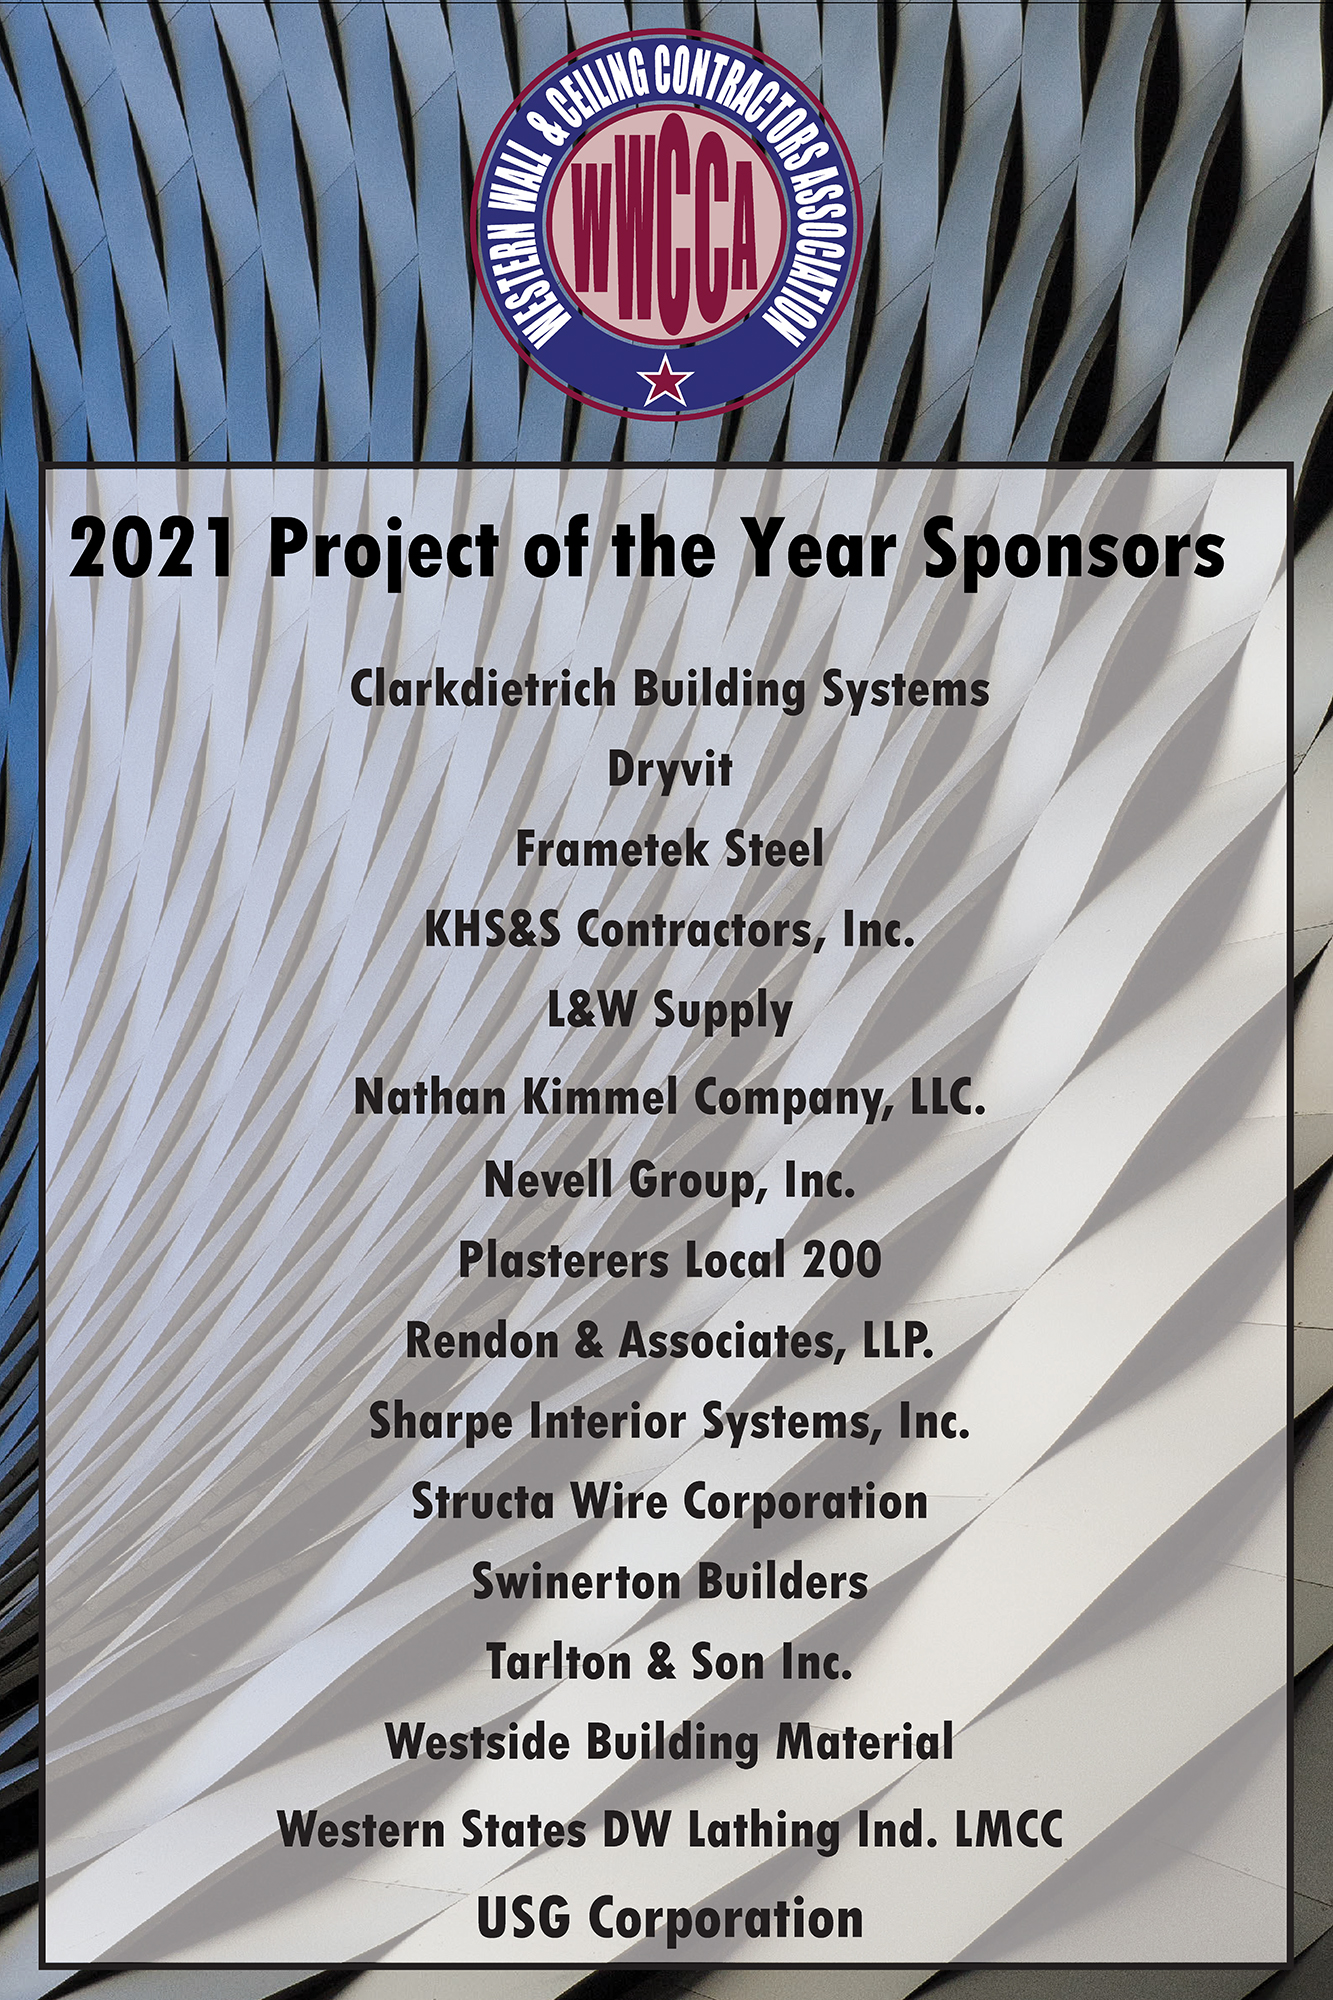 A list of sponsors for the 2 0 2 1 project.